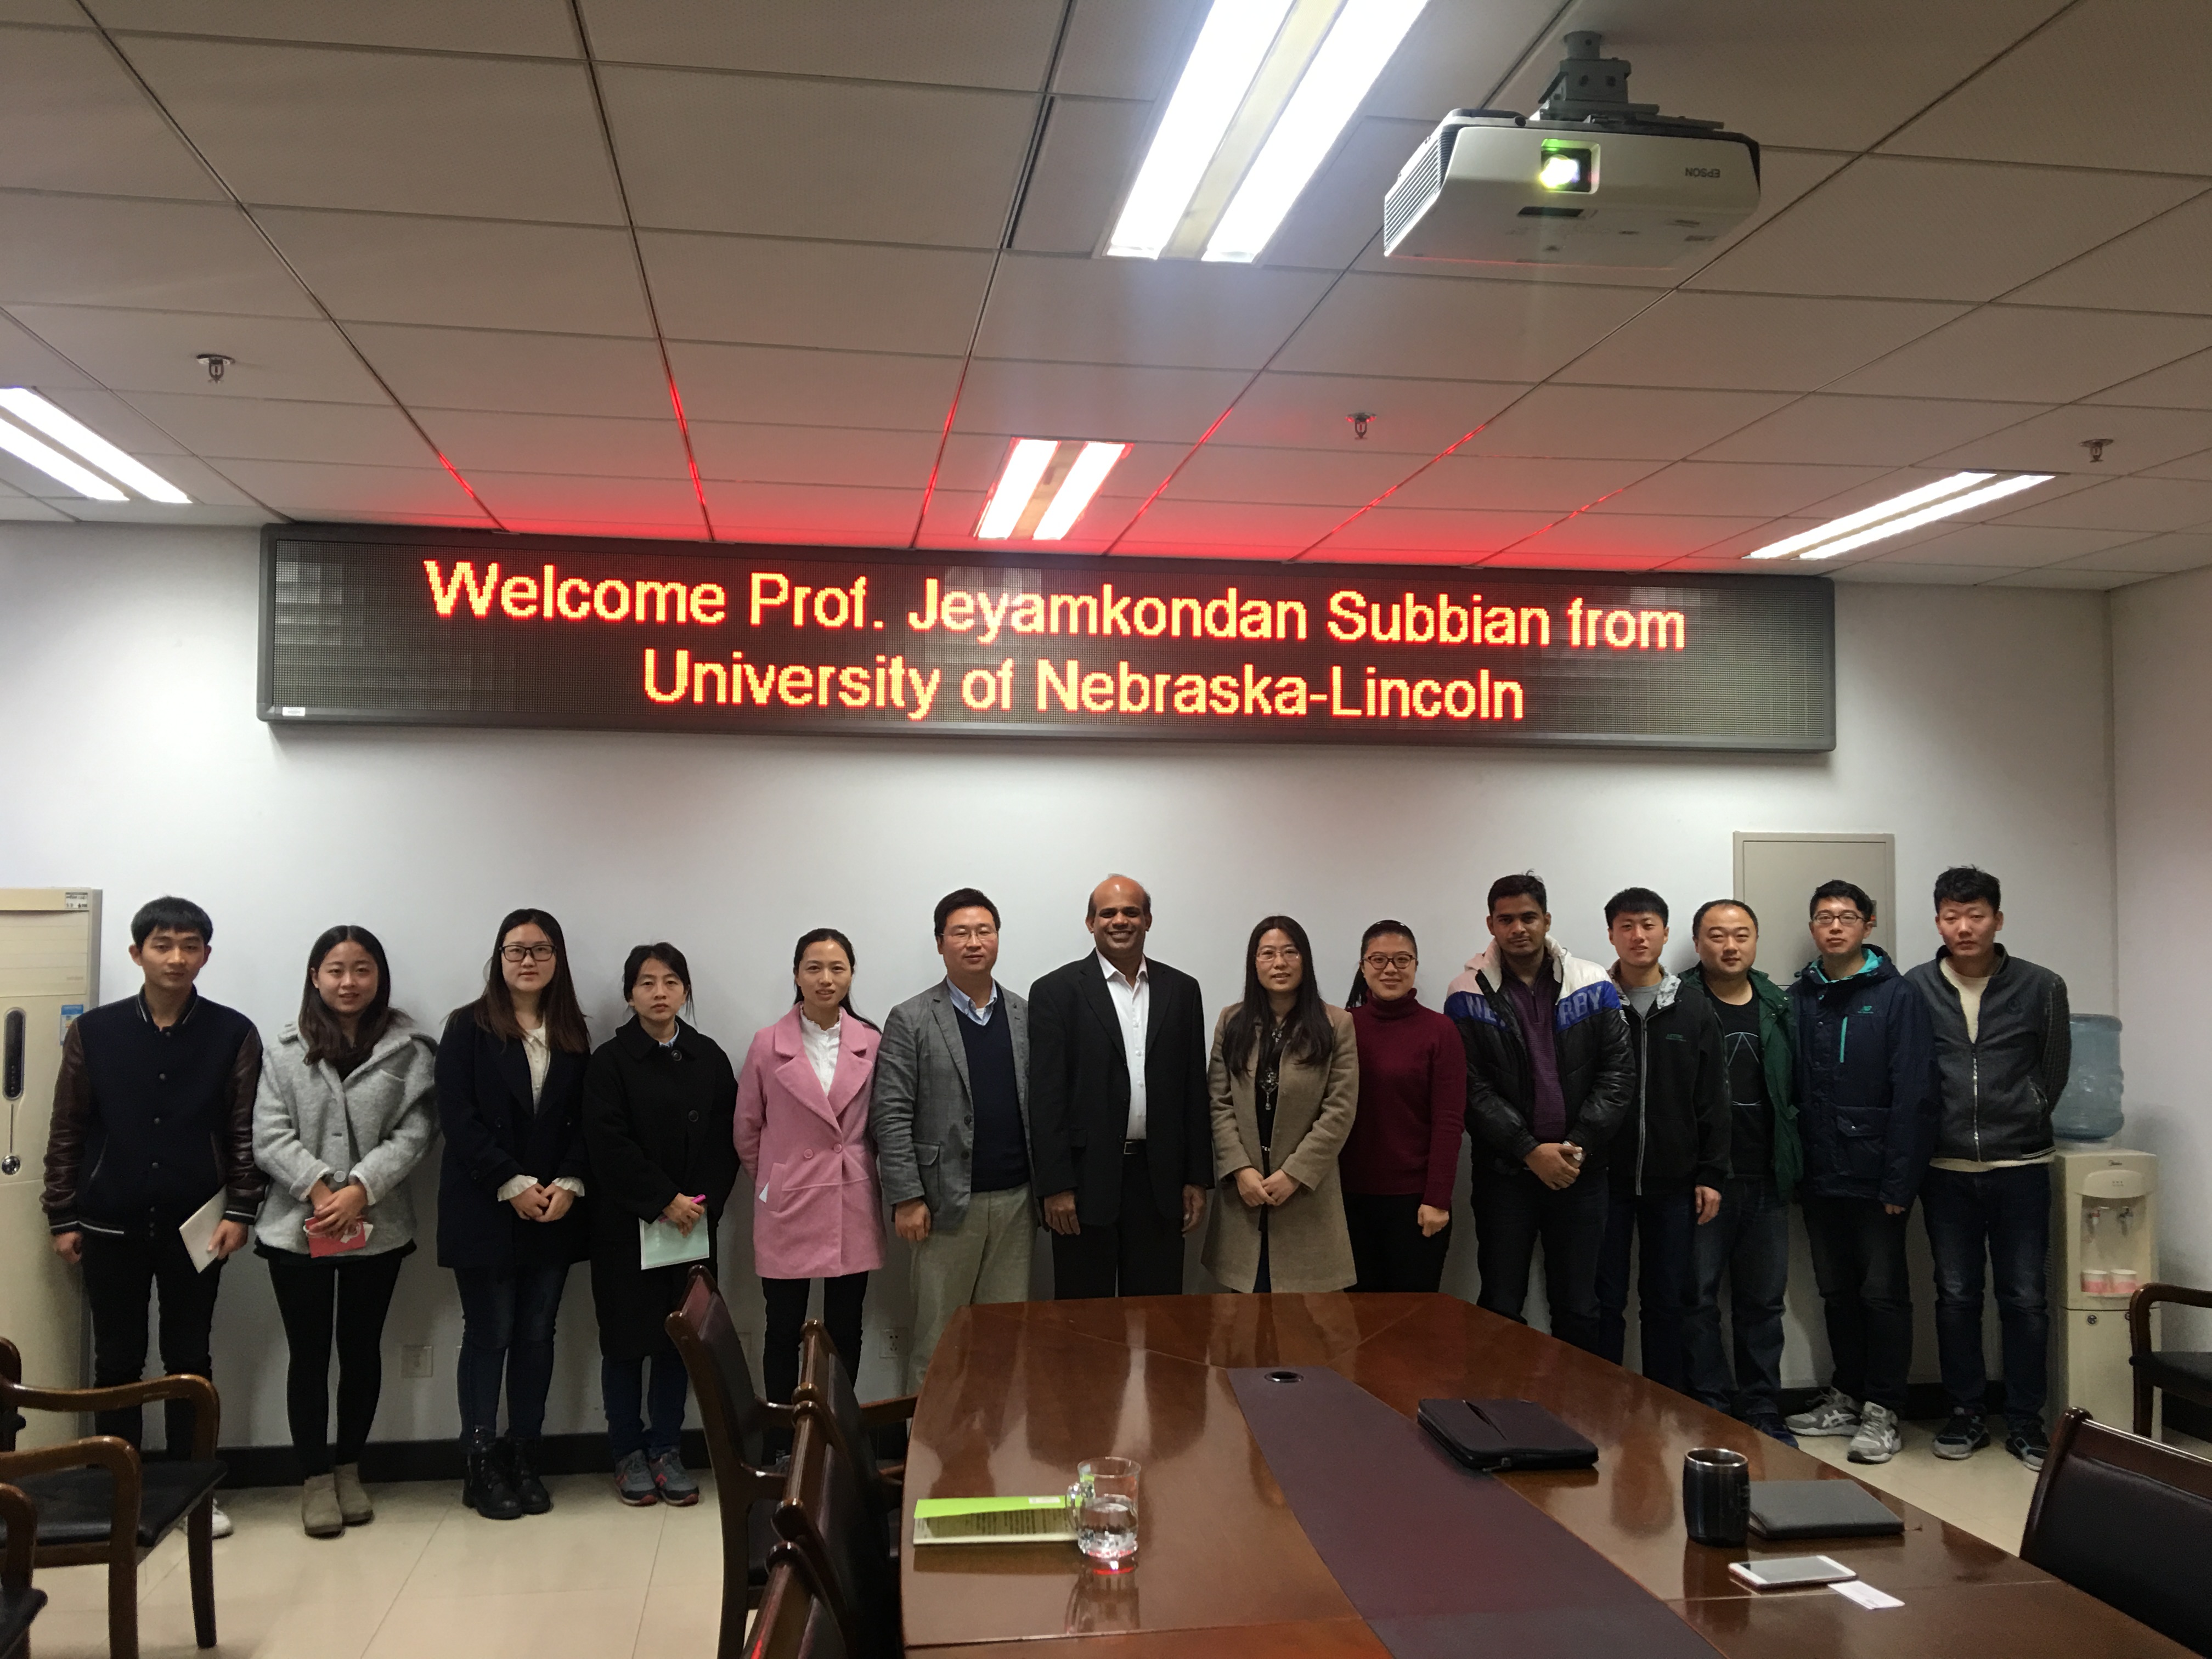 Professor Jeyam Subbiah received a warm welcome in China, where he was the keynote speaker at a food science conference.